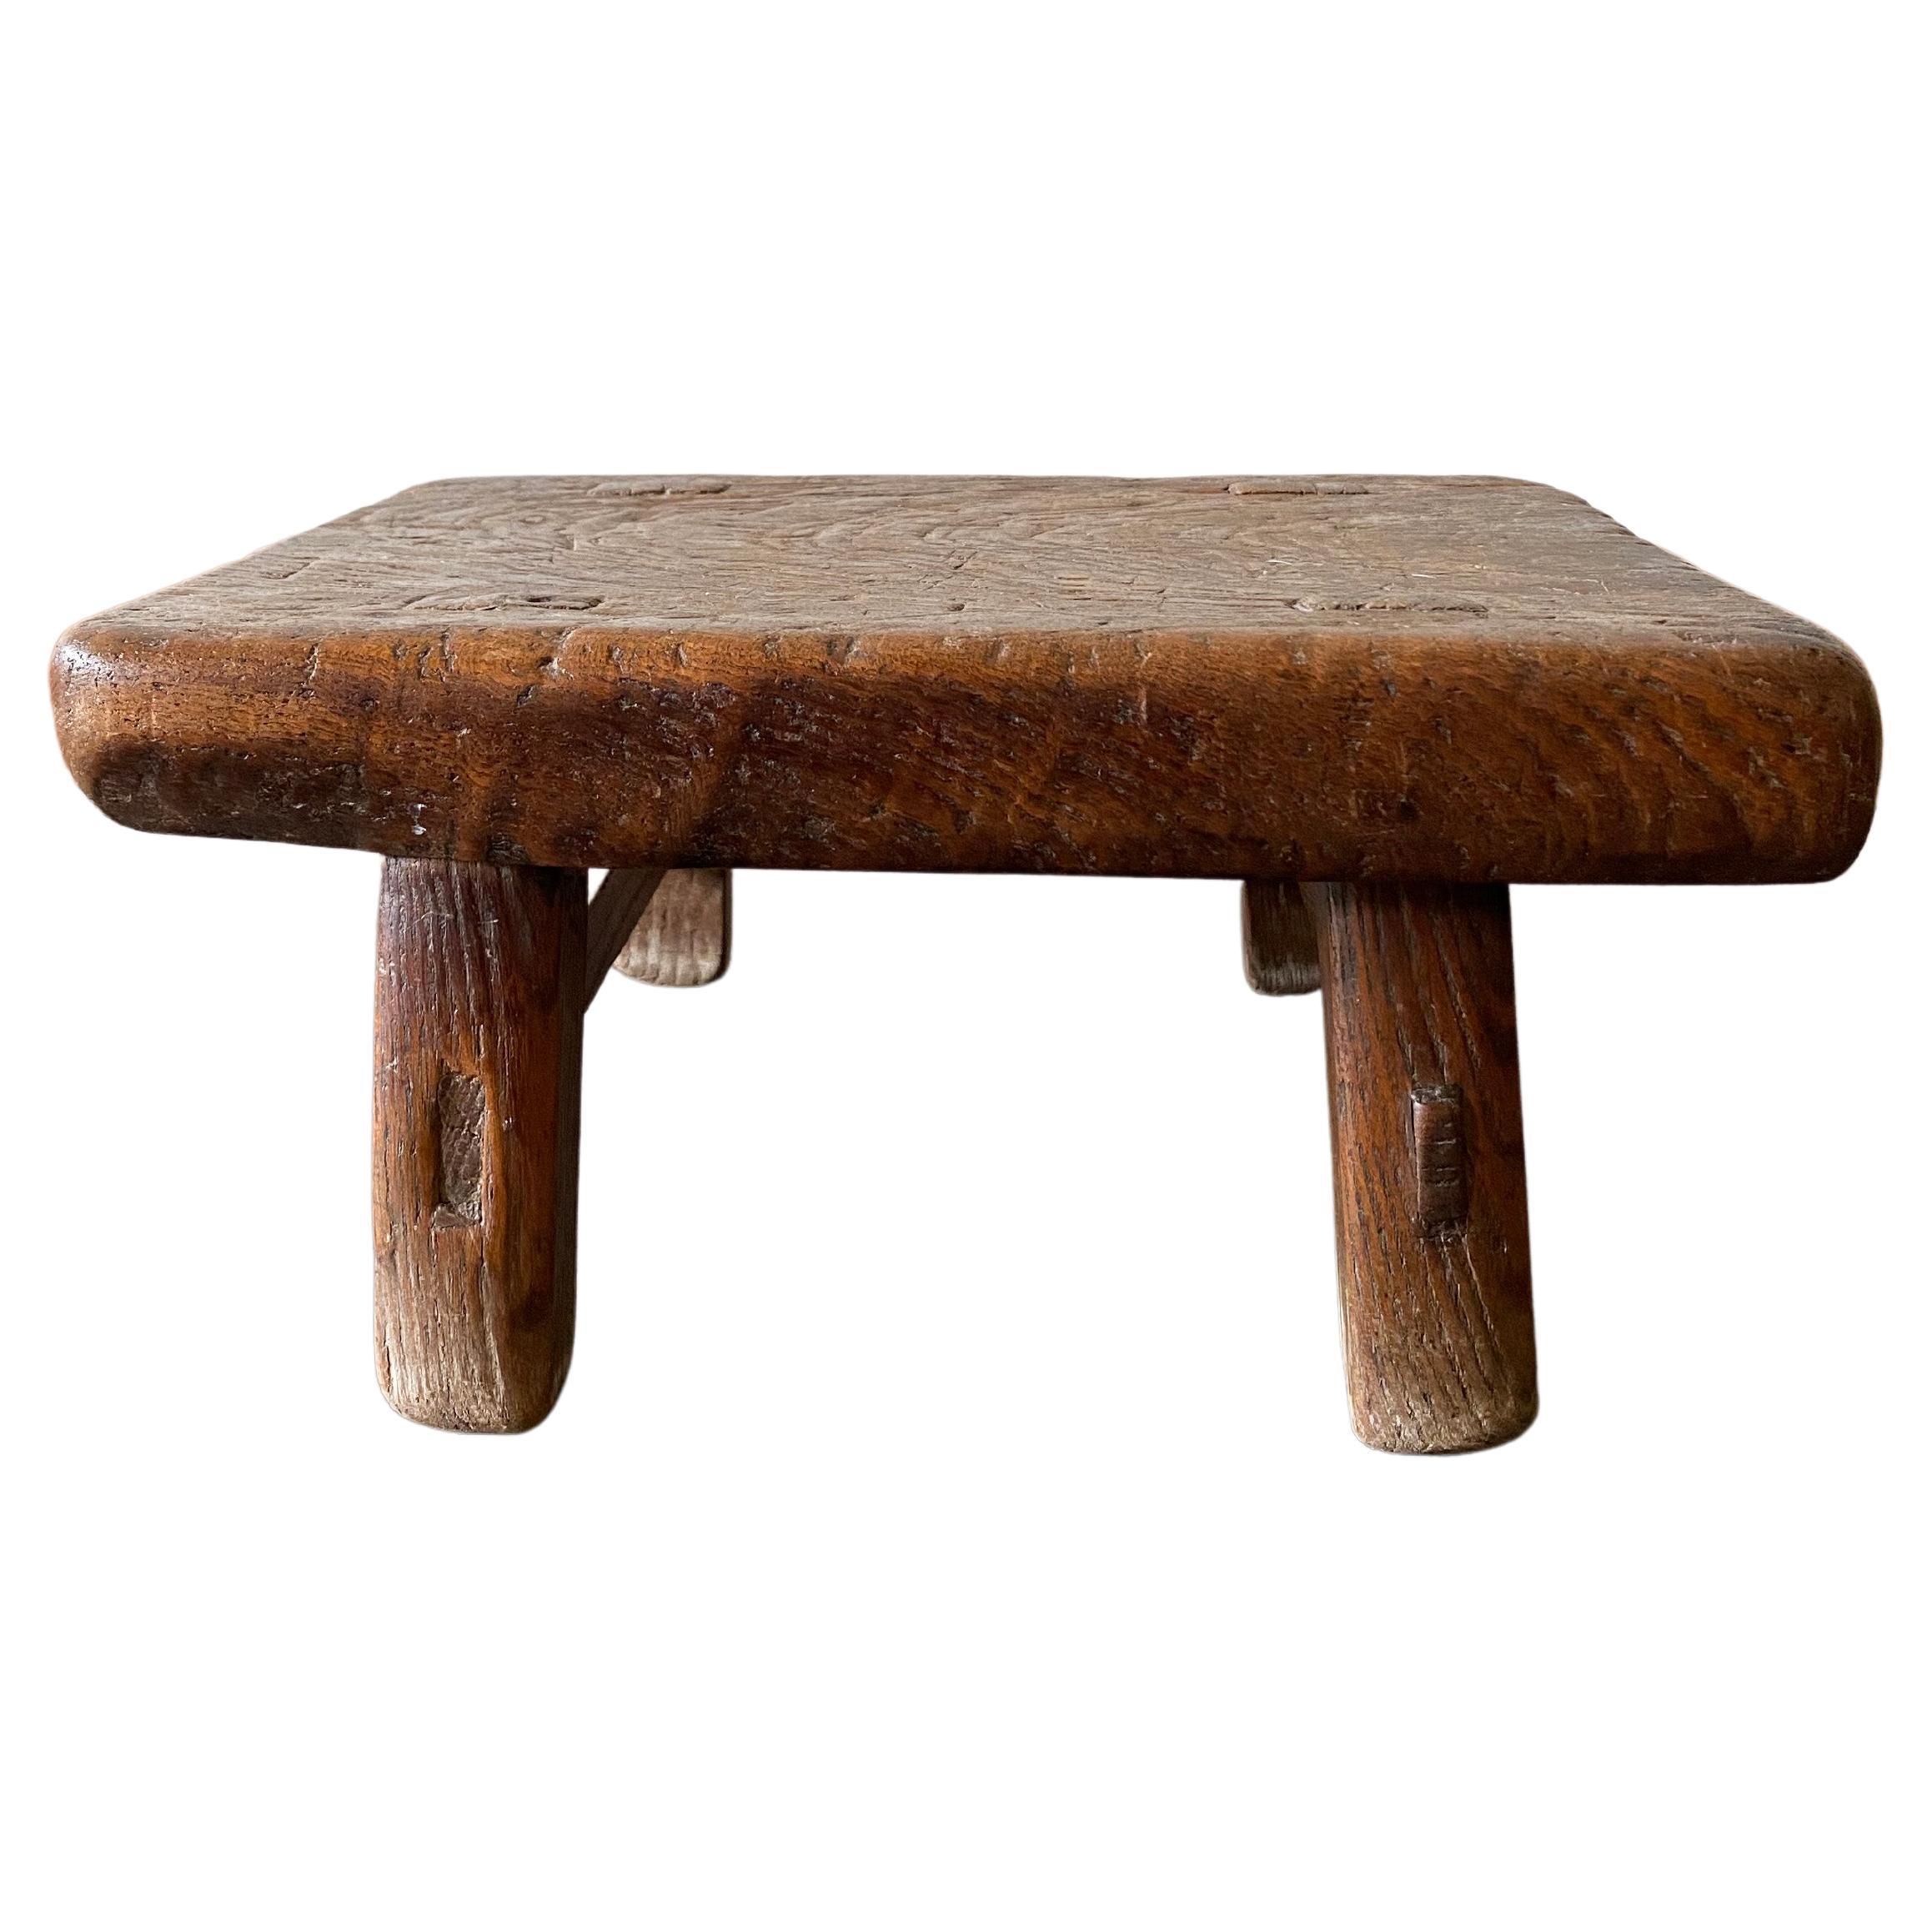 Antique Chinese Mini Low Elm Wood Stool, Early 20th Century For Sale